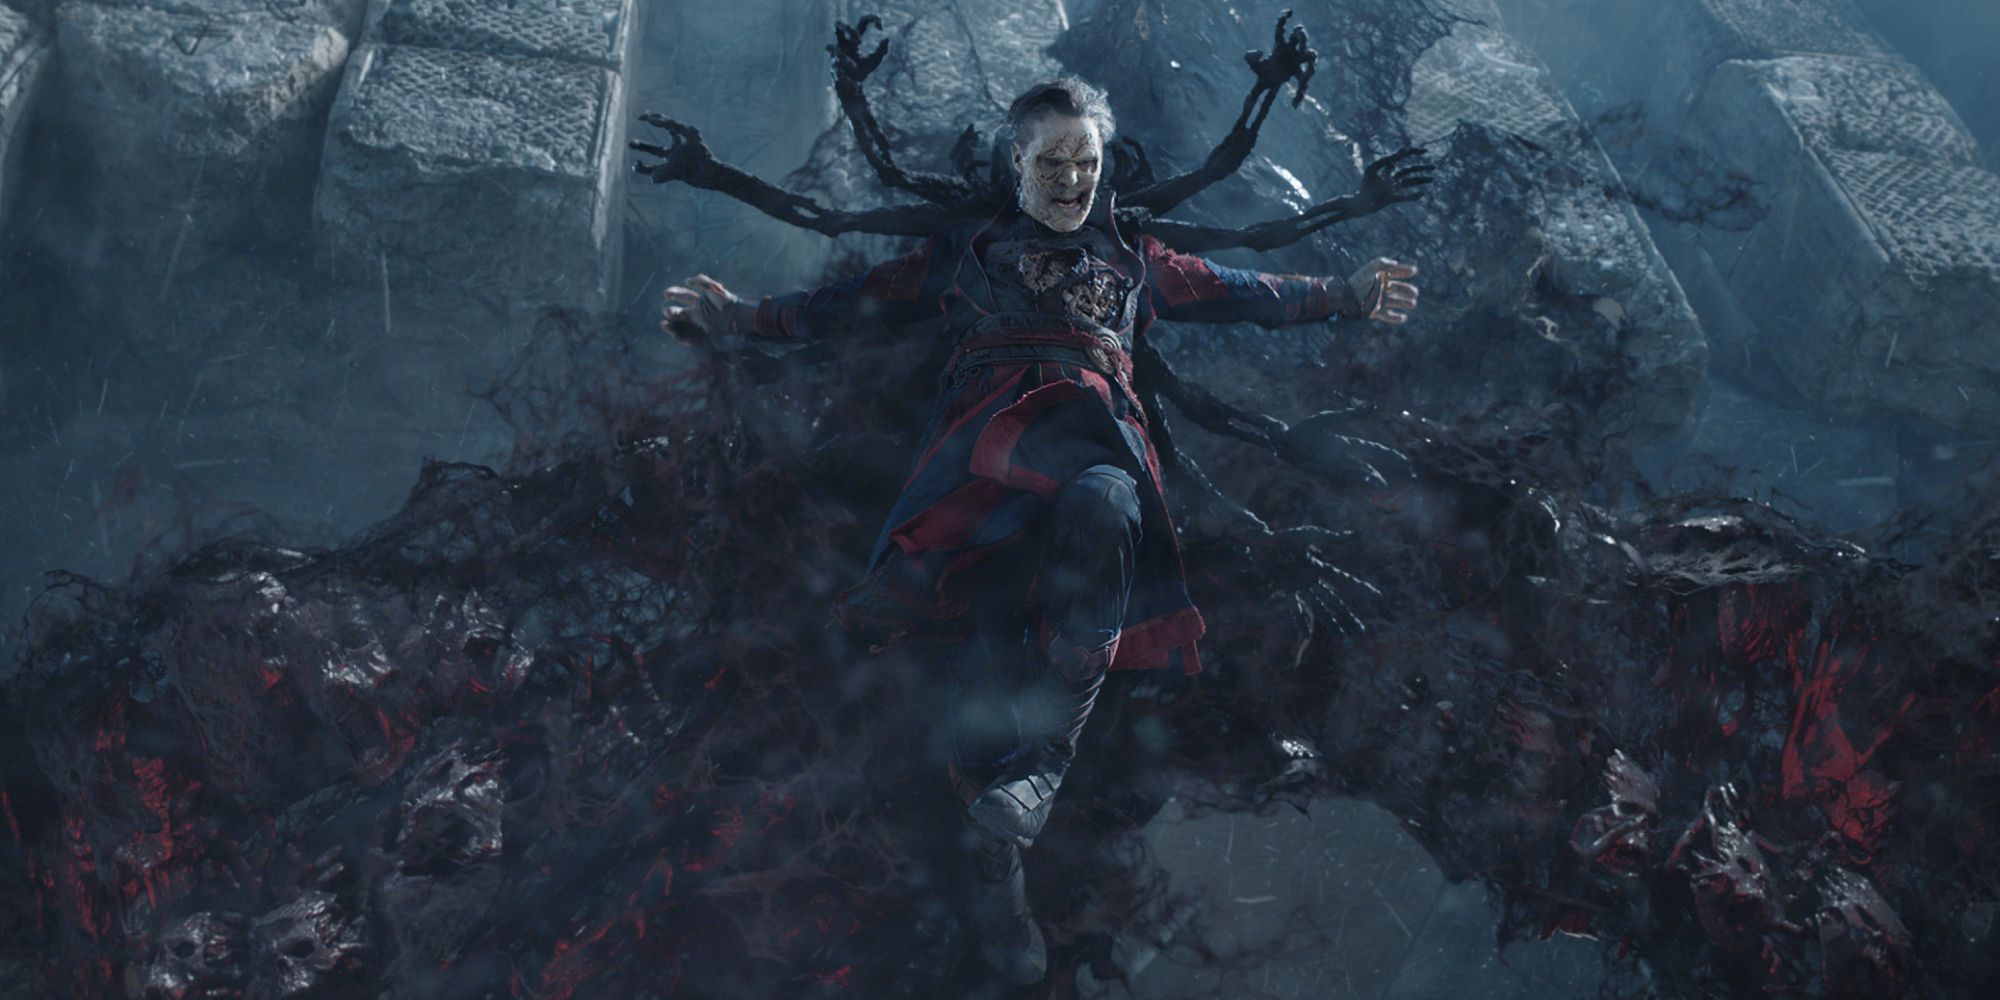 Doctor Strange possesses the dead in the Multiverse of Madness to fight the Scarlet Witch.